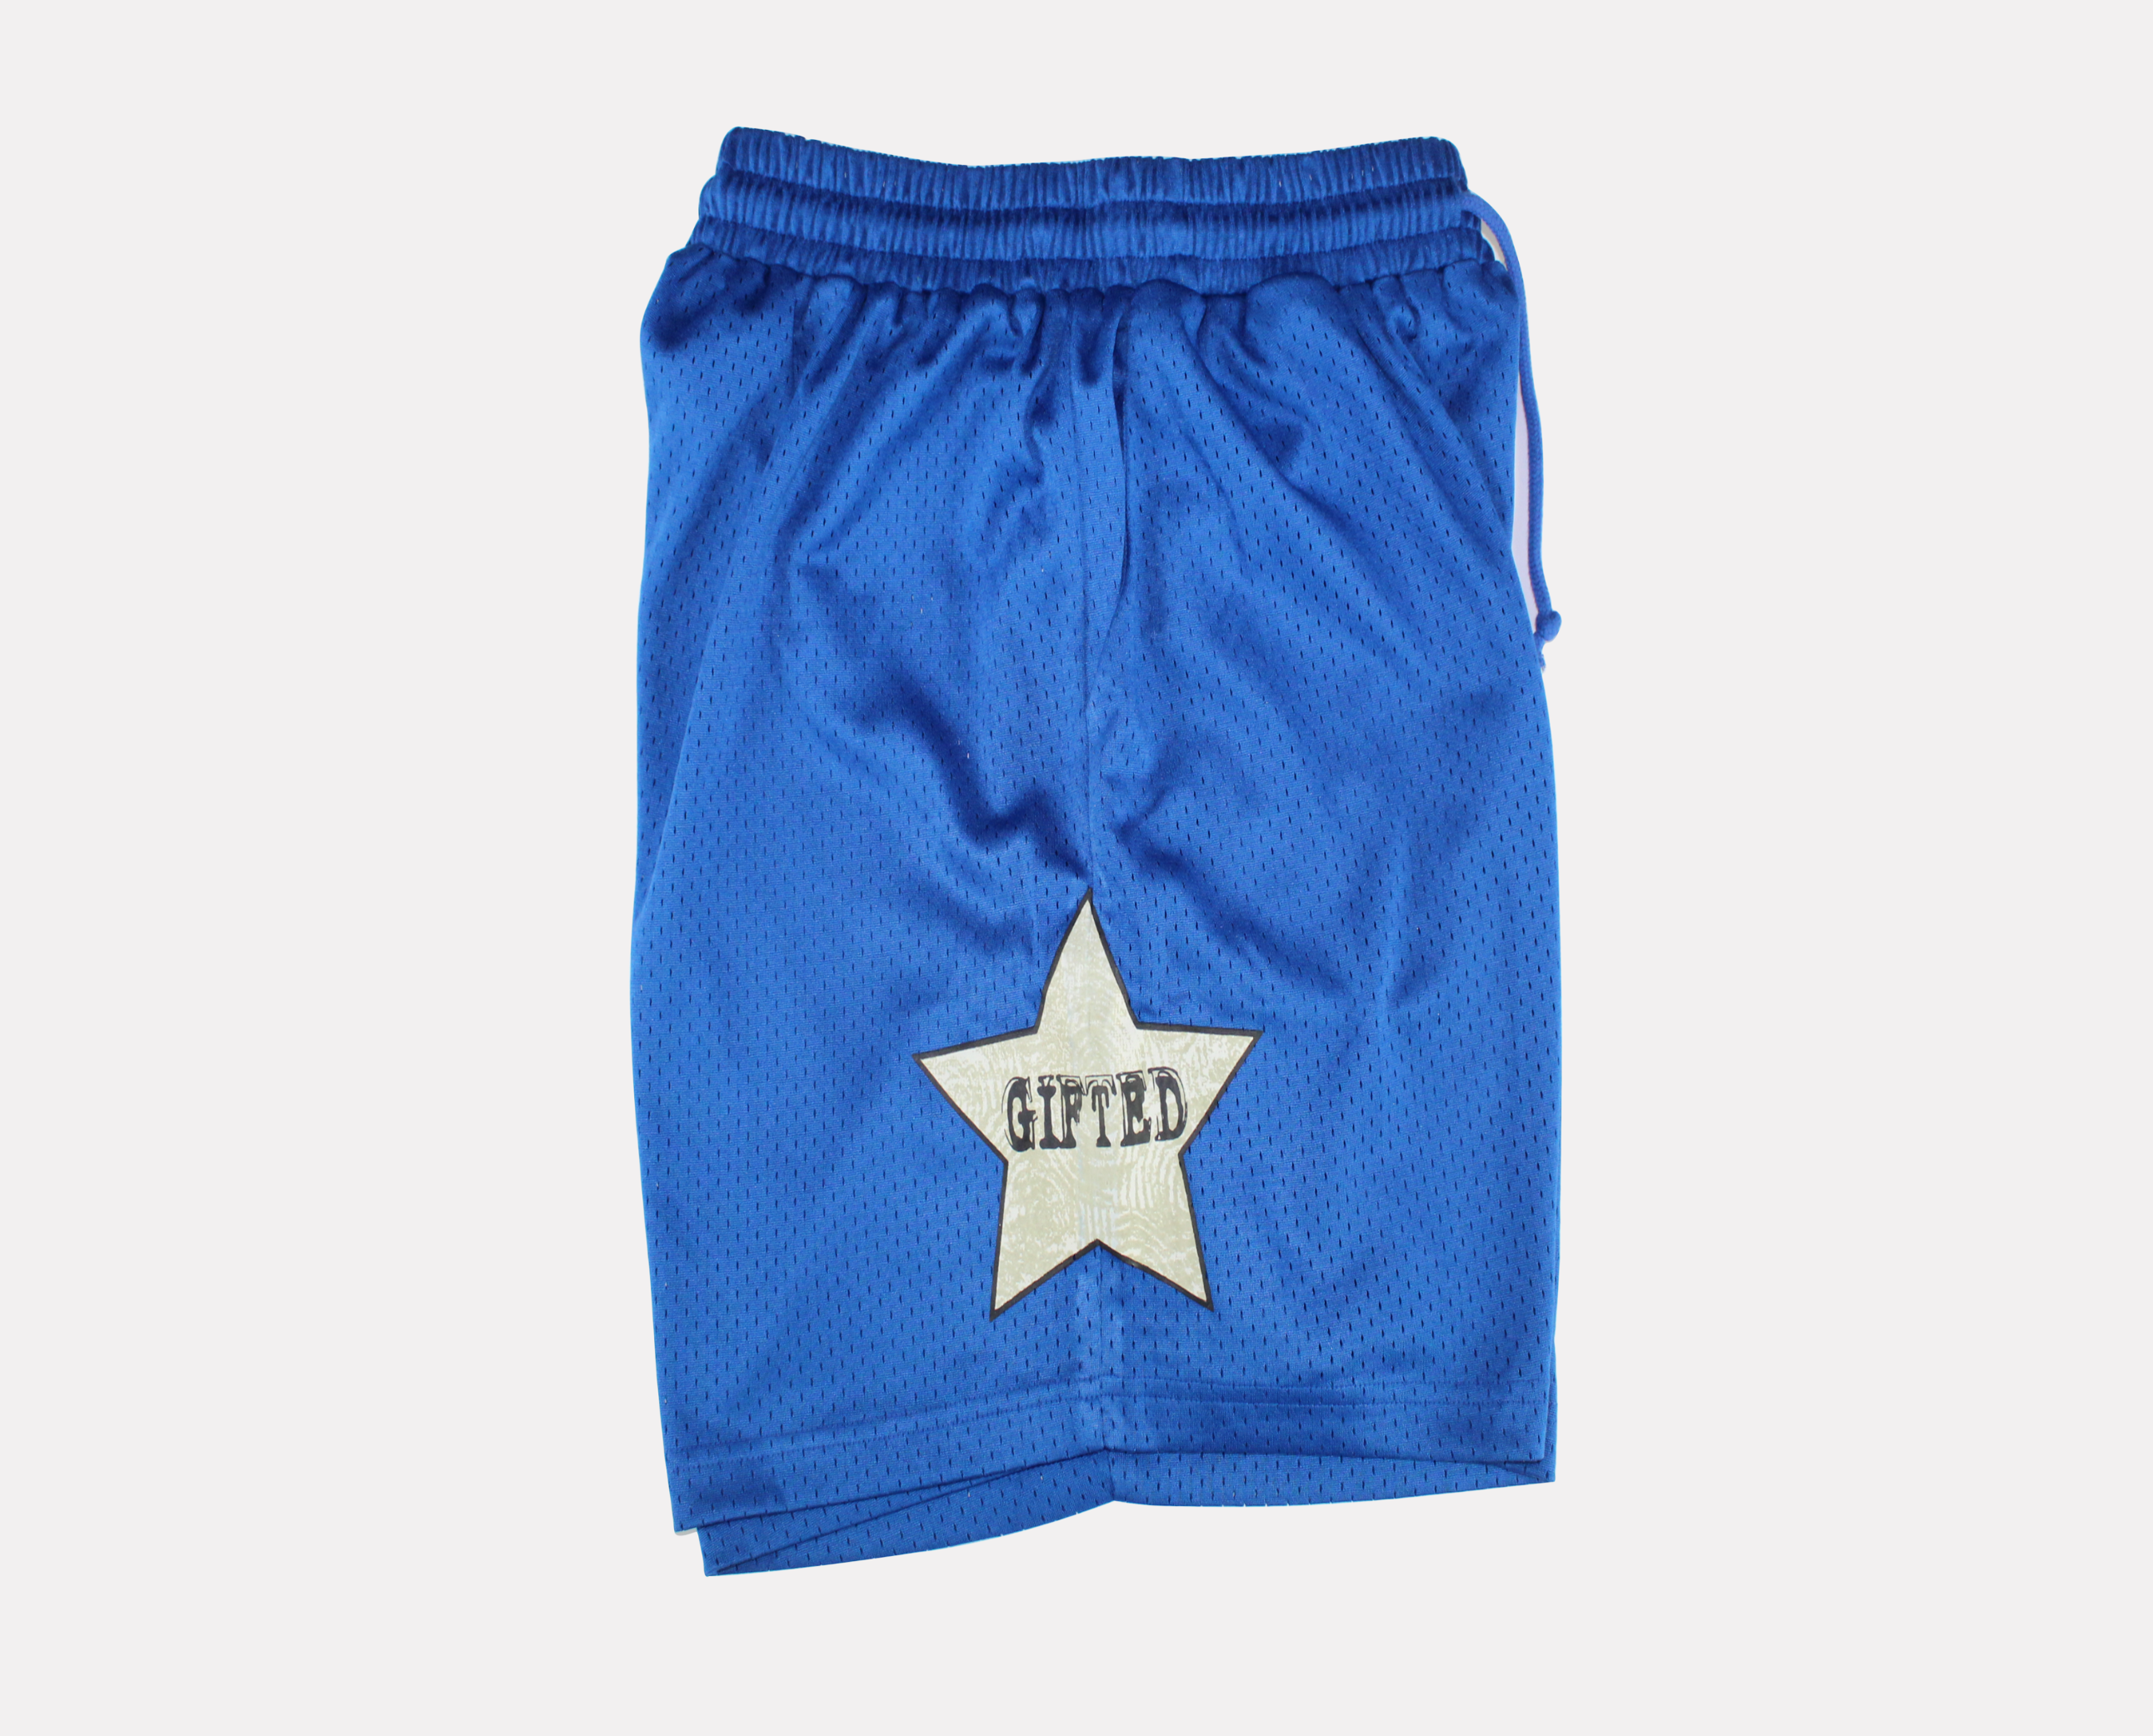 Gifted All Star Shorts (Blue)